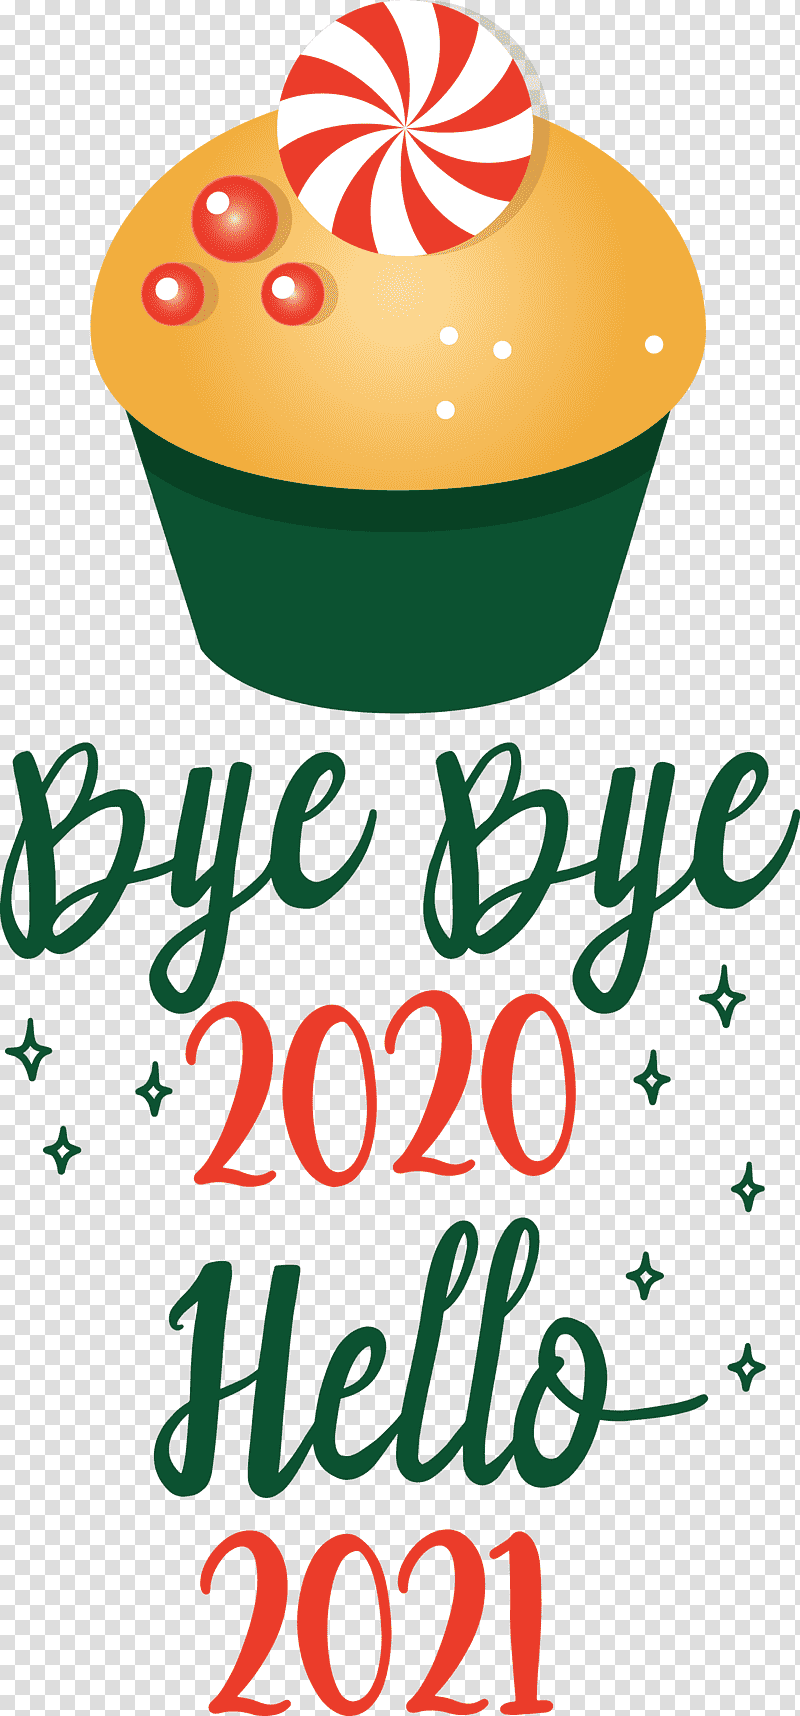 Hello 2021 Year Bye bye 2020 Year, Logo, Meter transparent background PNG clipart